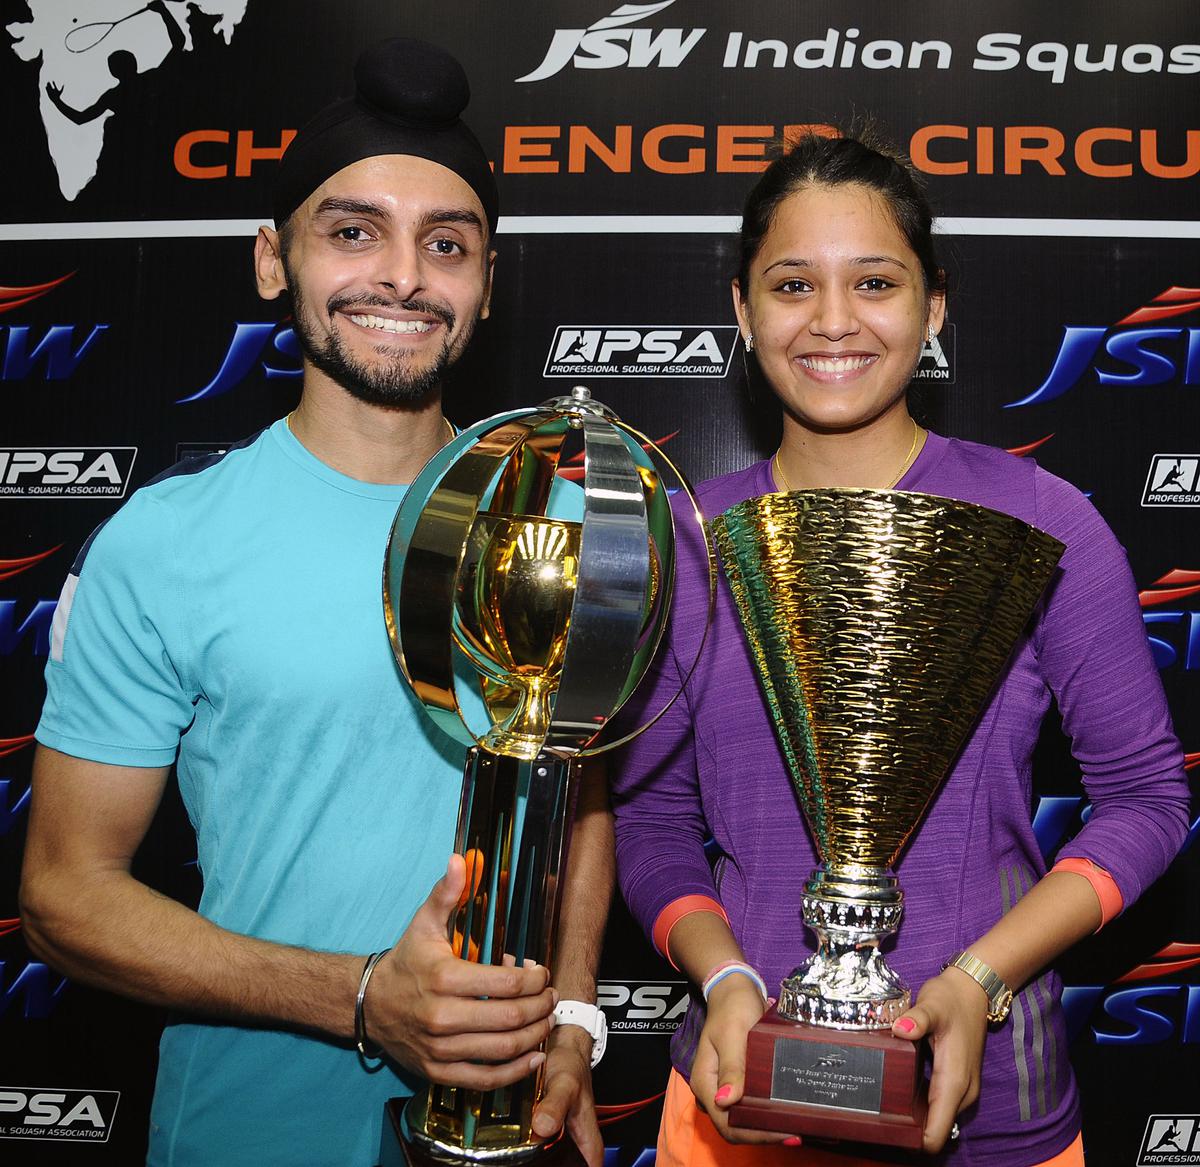 Dipika Pallikal and Harinder Pal Sandhu celebrate with their 2014 WSA Challenger Squash tournament trophies. 